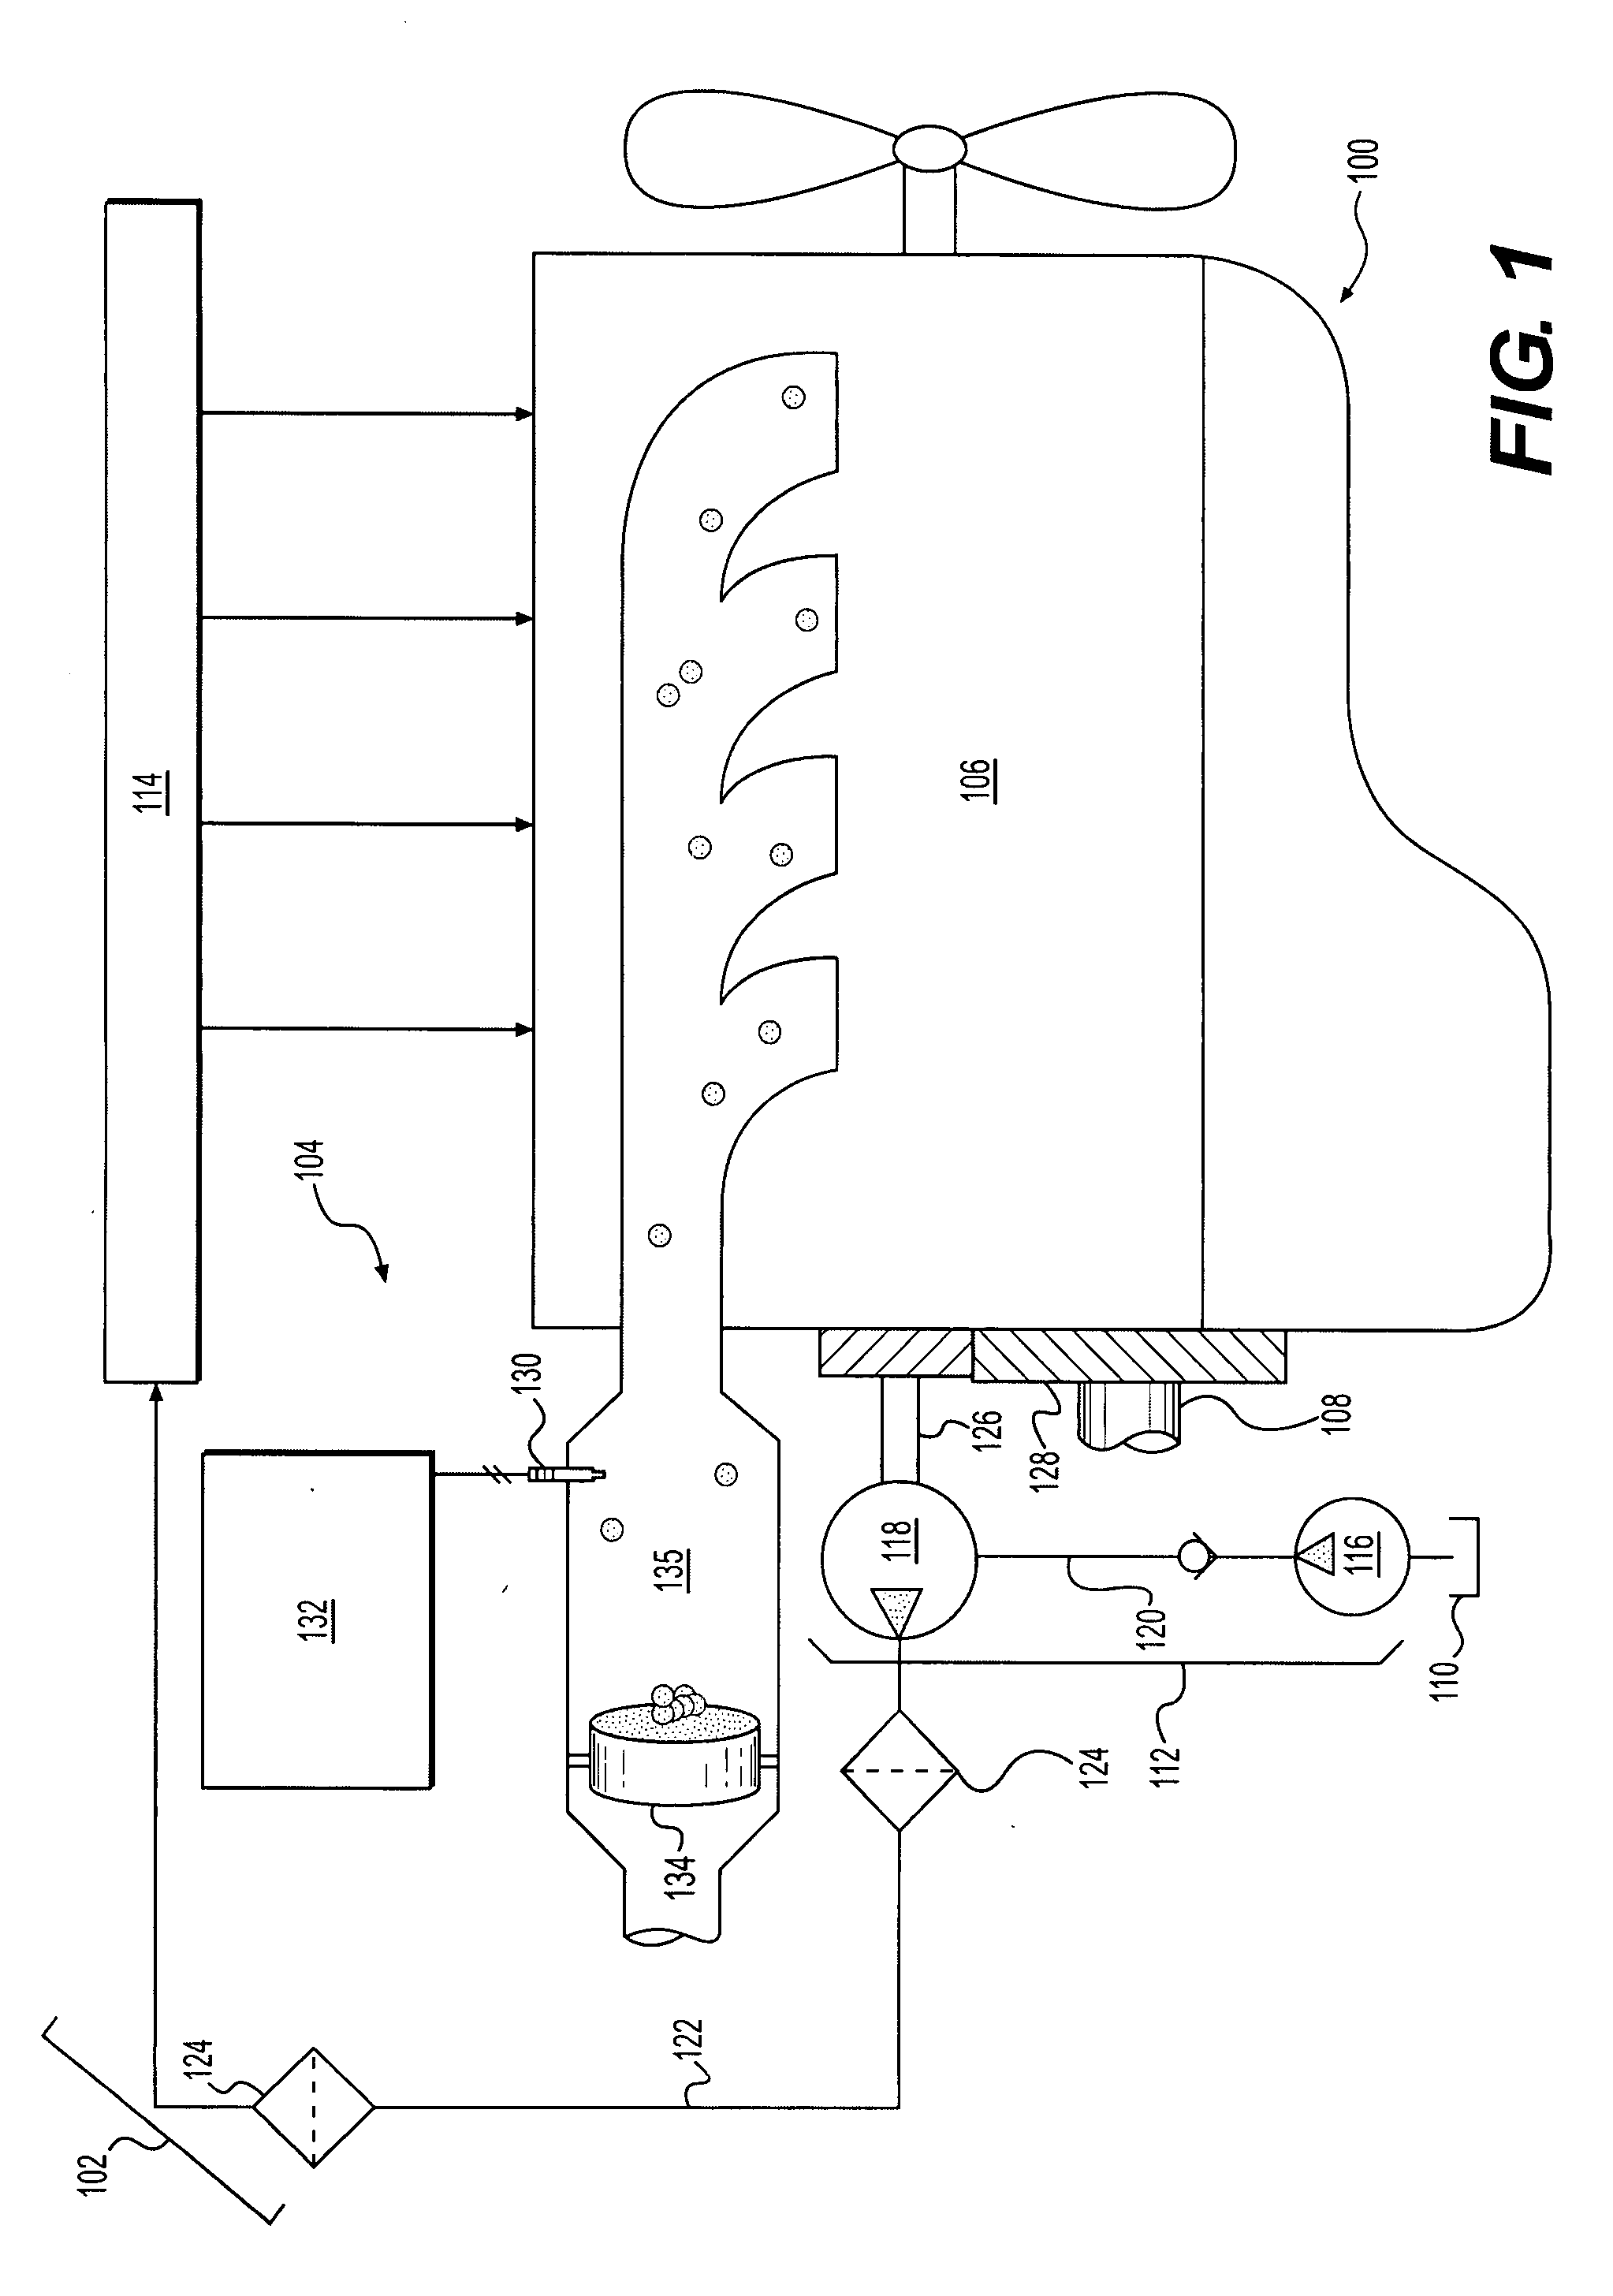 Exhaust after-treatment system having a secondary tank